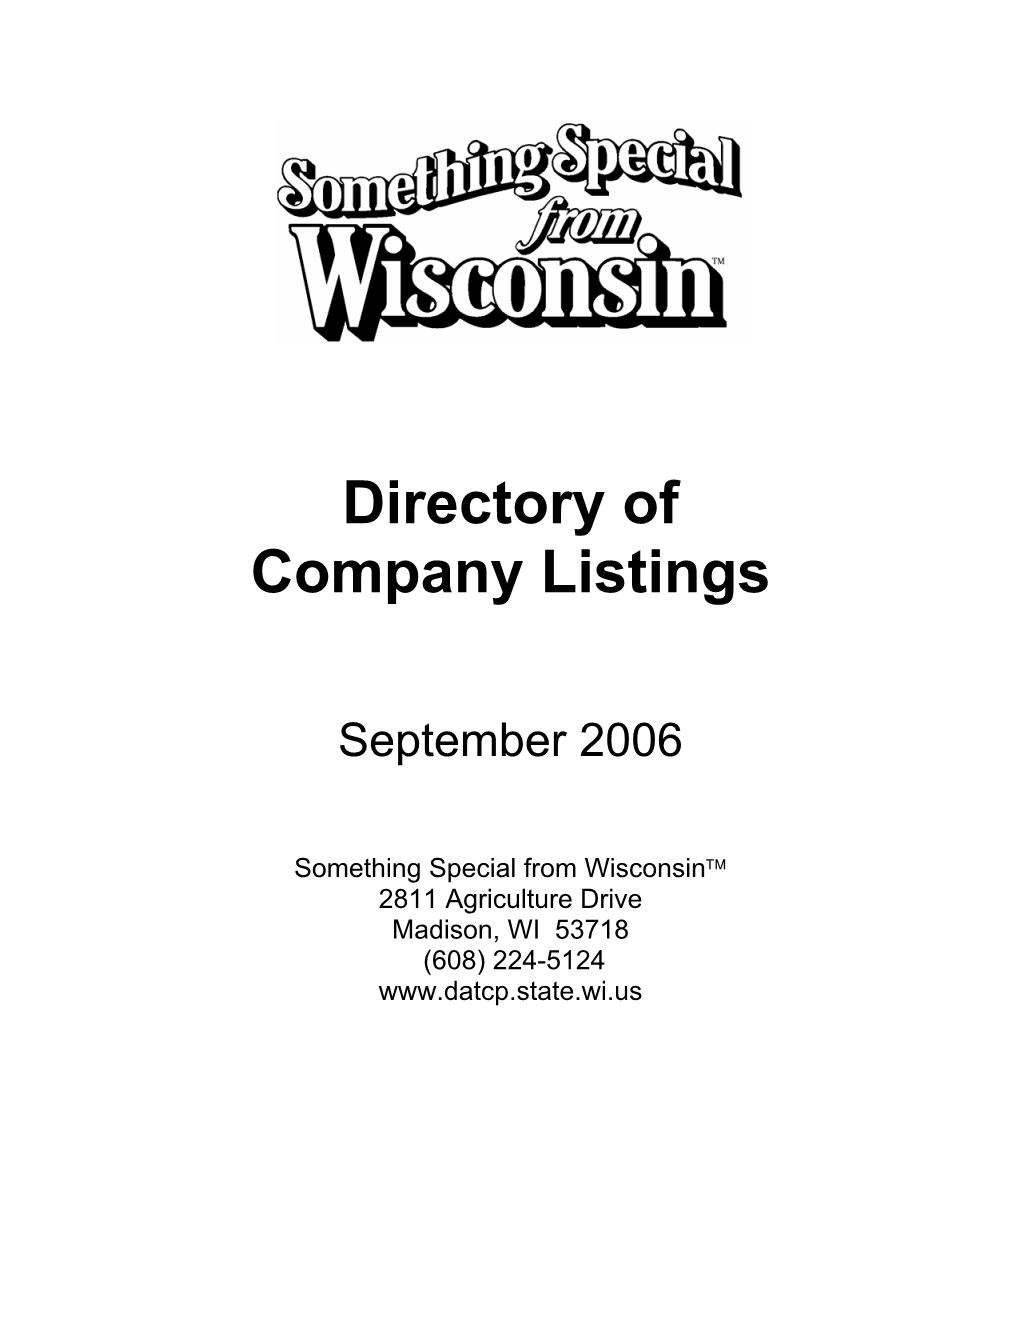 Directory of Company Listings